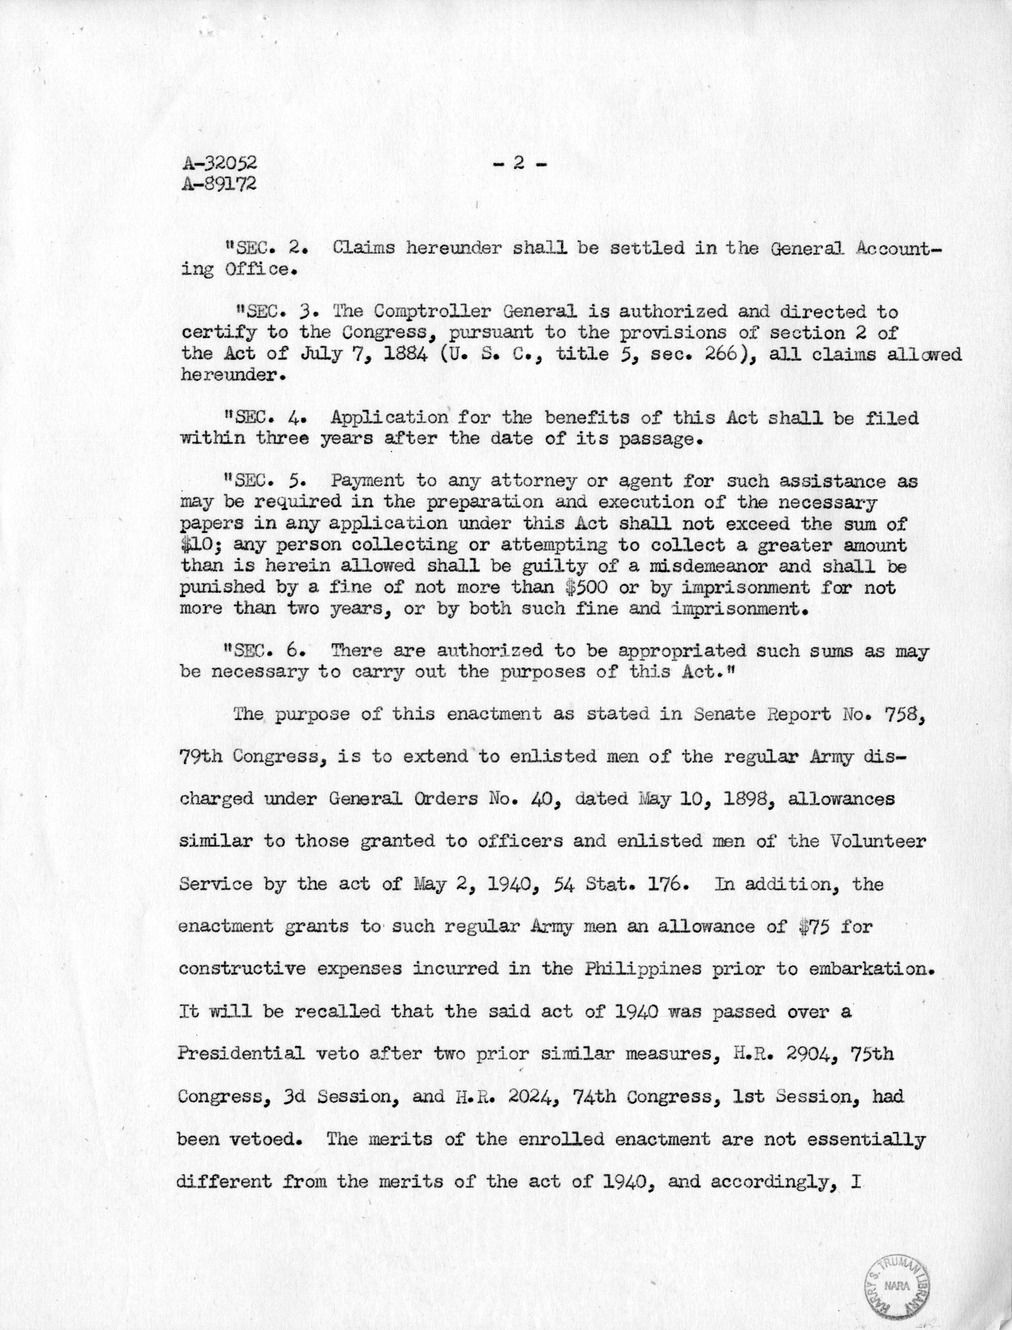 Memorandum from Harold D. Smith to M. C. Latta, H.R. 1192, Granting Travel Pay and Other Allowances to Certain Soldiers of the War with Spain and the Philippine Insurrection Who Were Discharged in the Philippine Islands, with Attachments